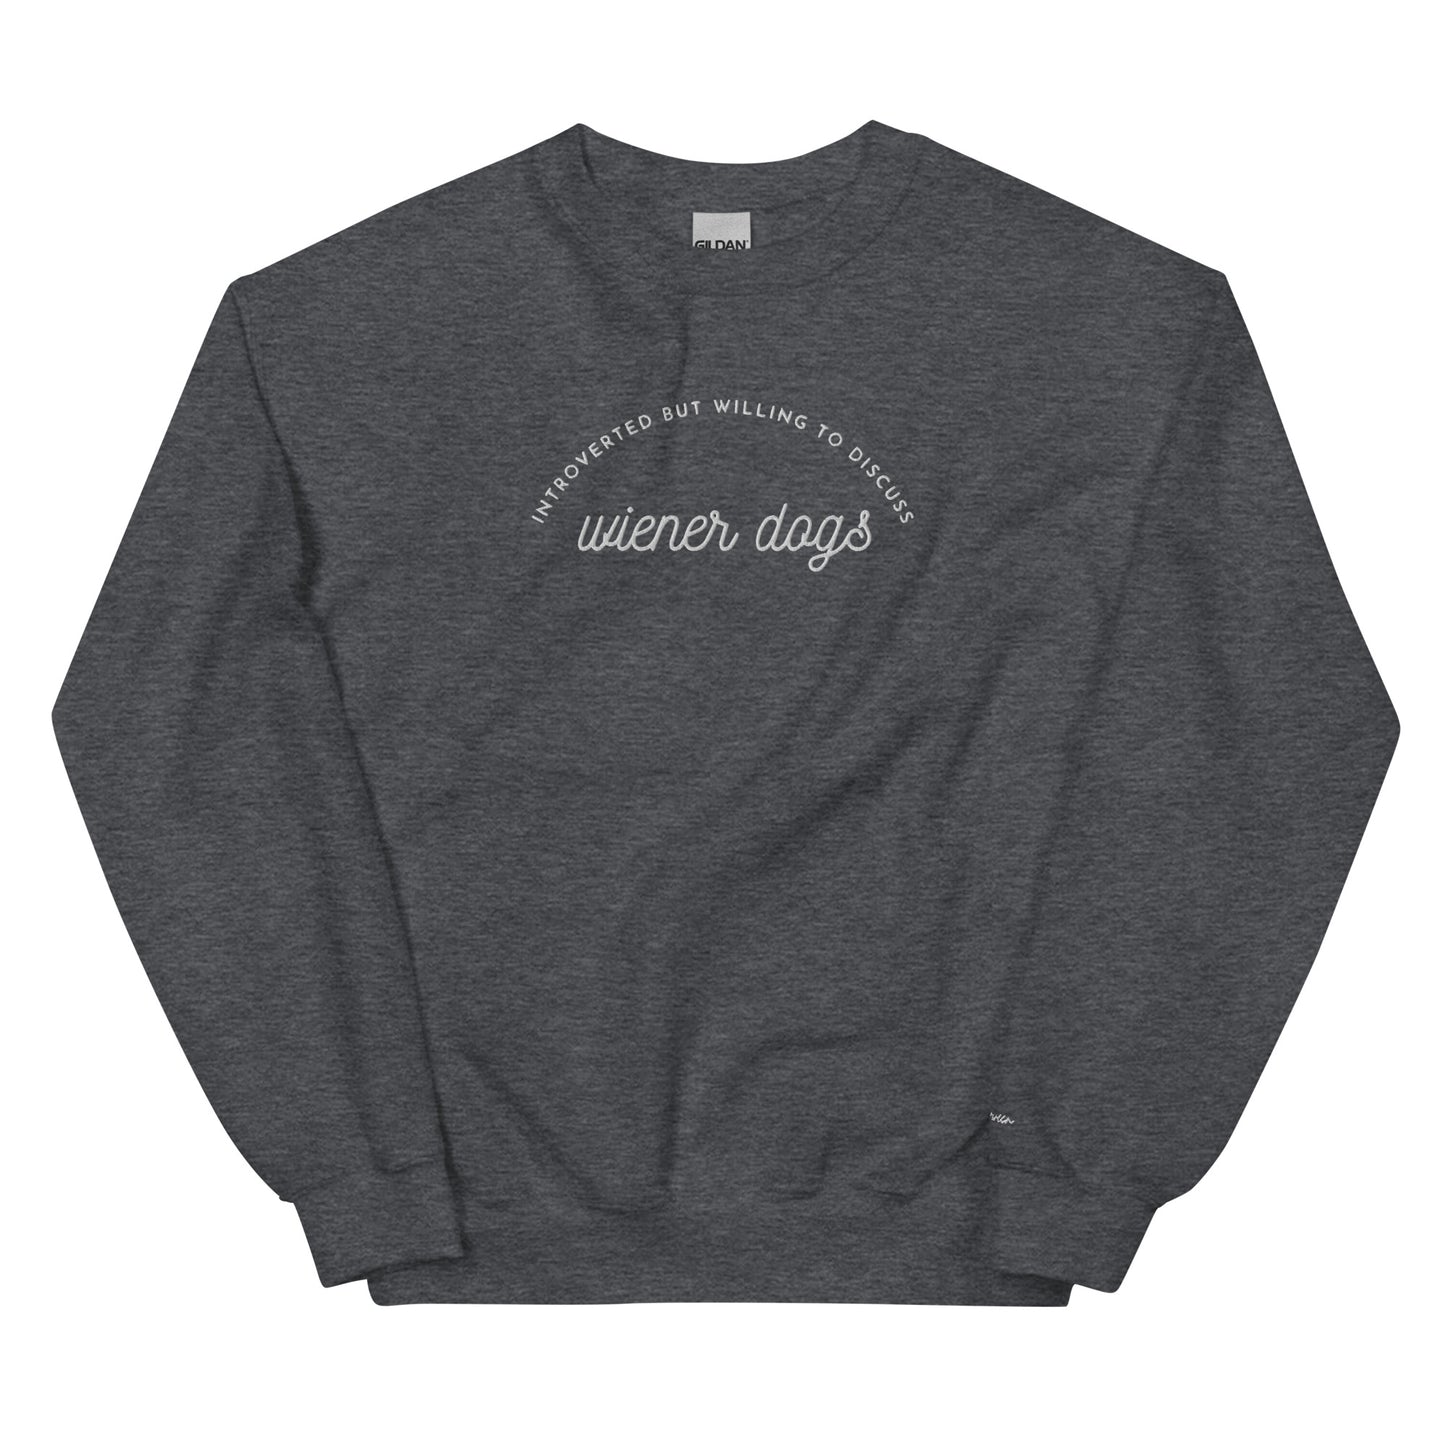 EMBROIDERED SWEATSHIRT - anti social but willing to discuss wiener dogs